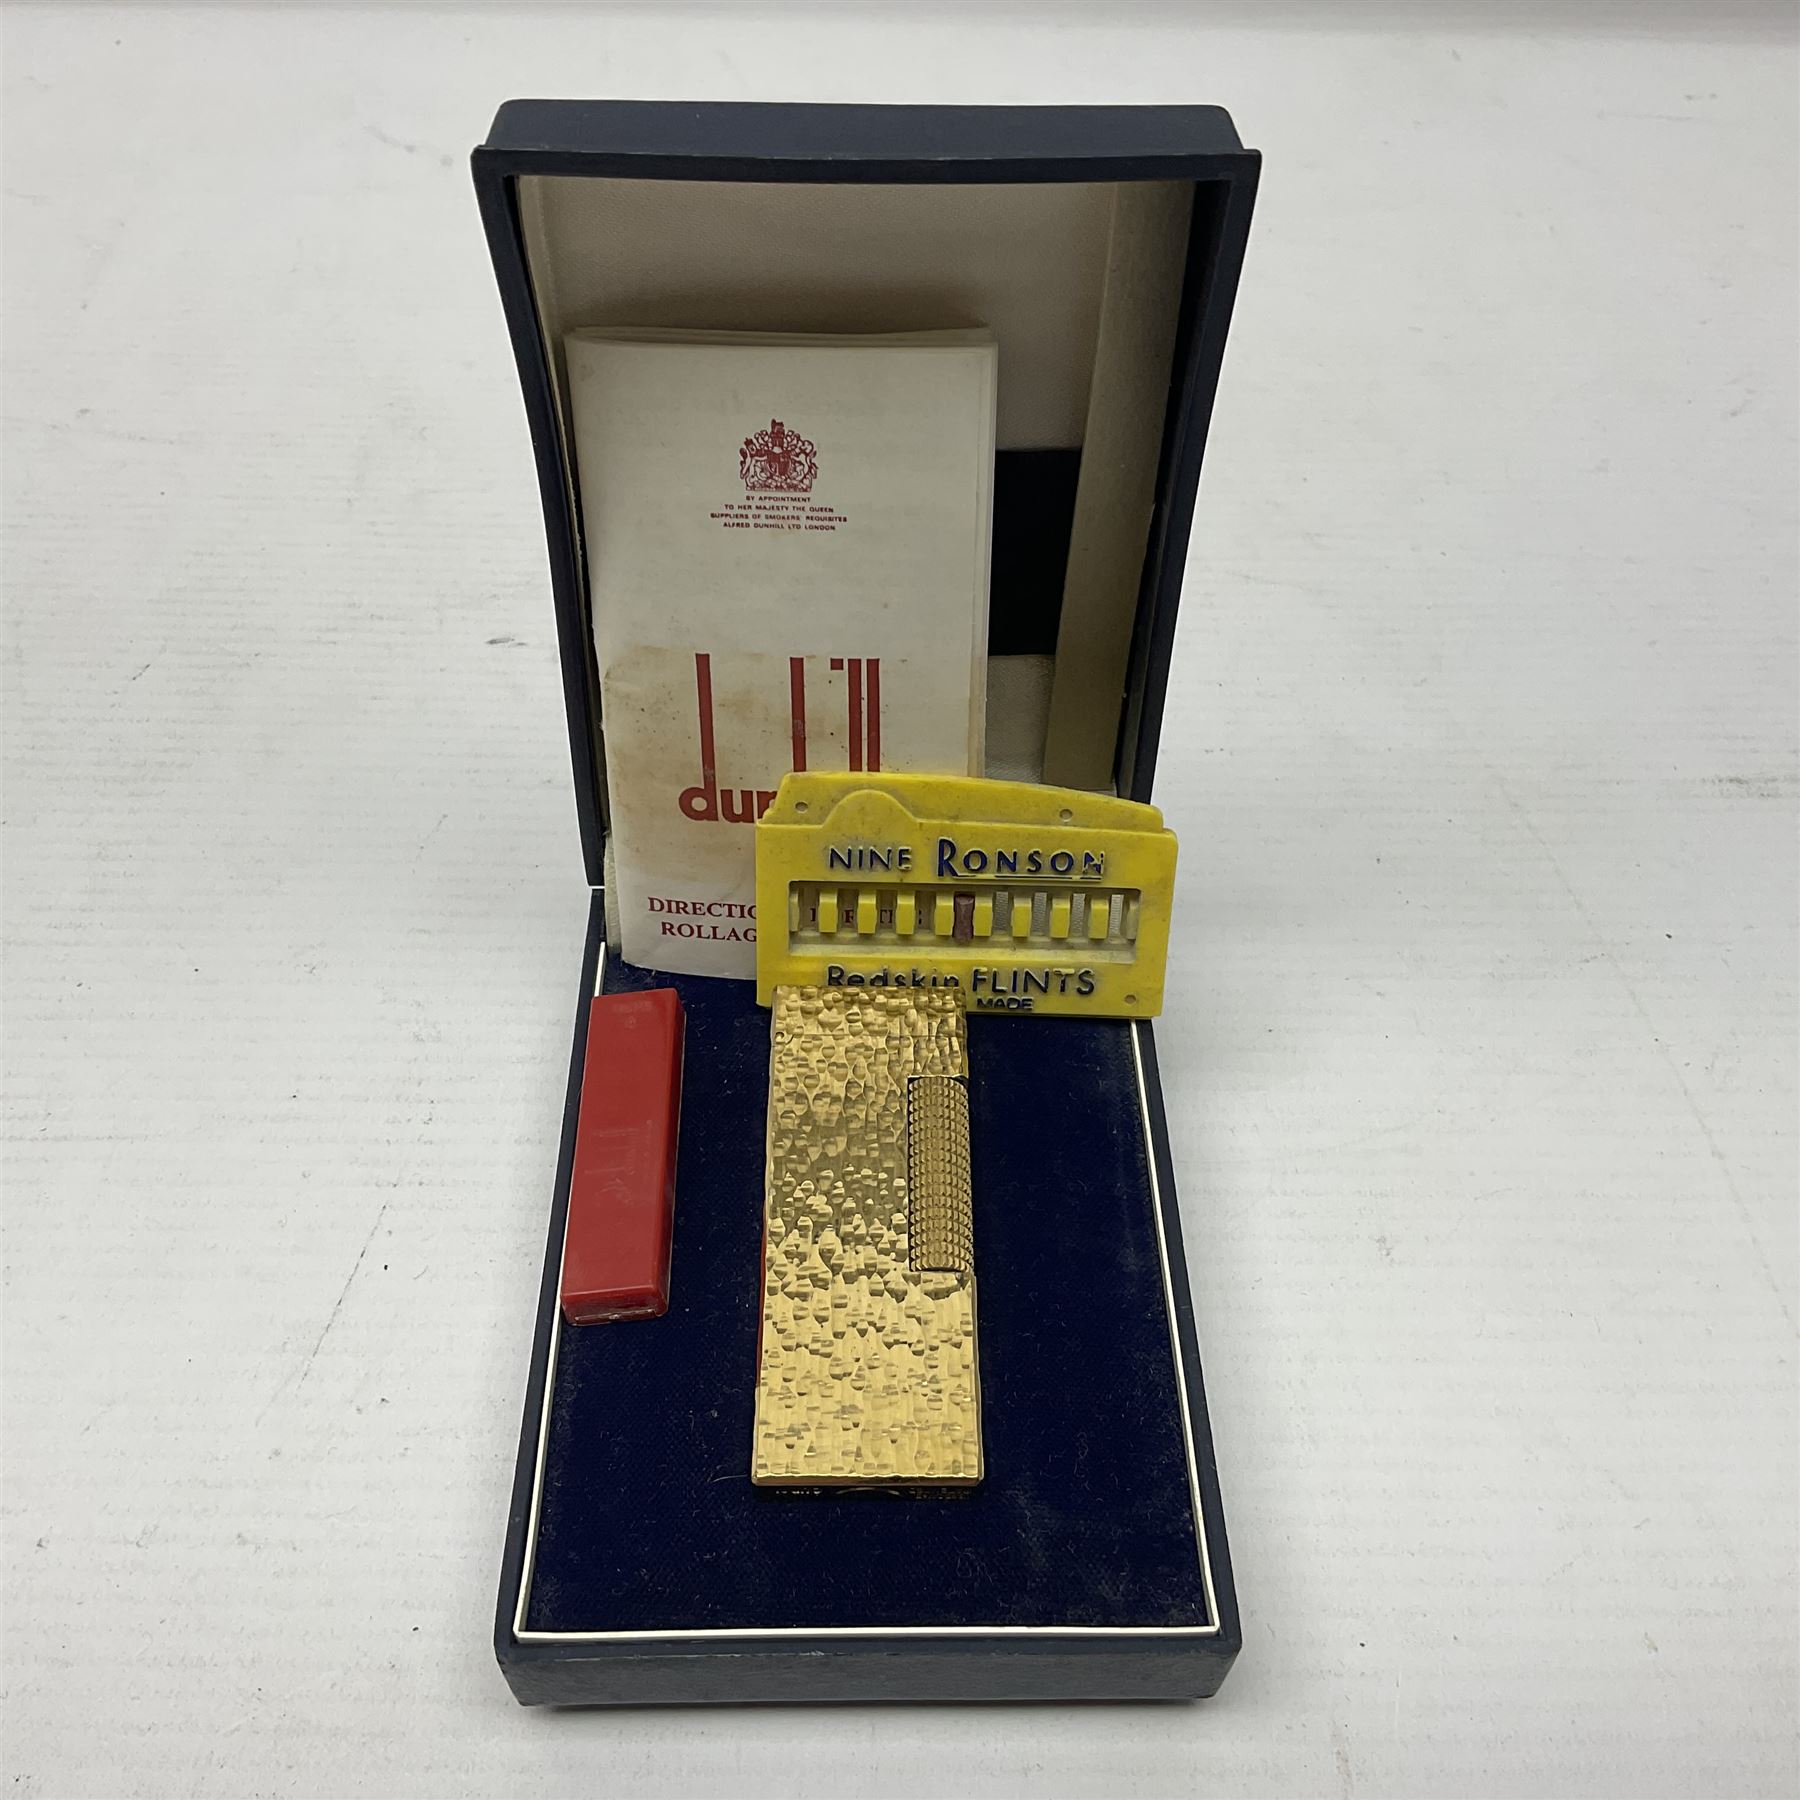 Dunhill gold plated lighter with textured bark effect decoration - Image 2 of 6